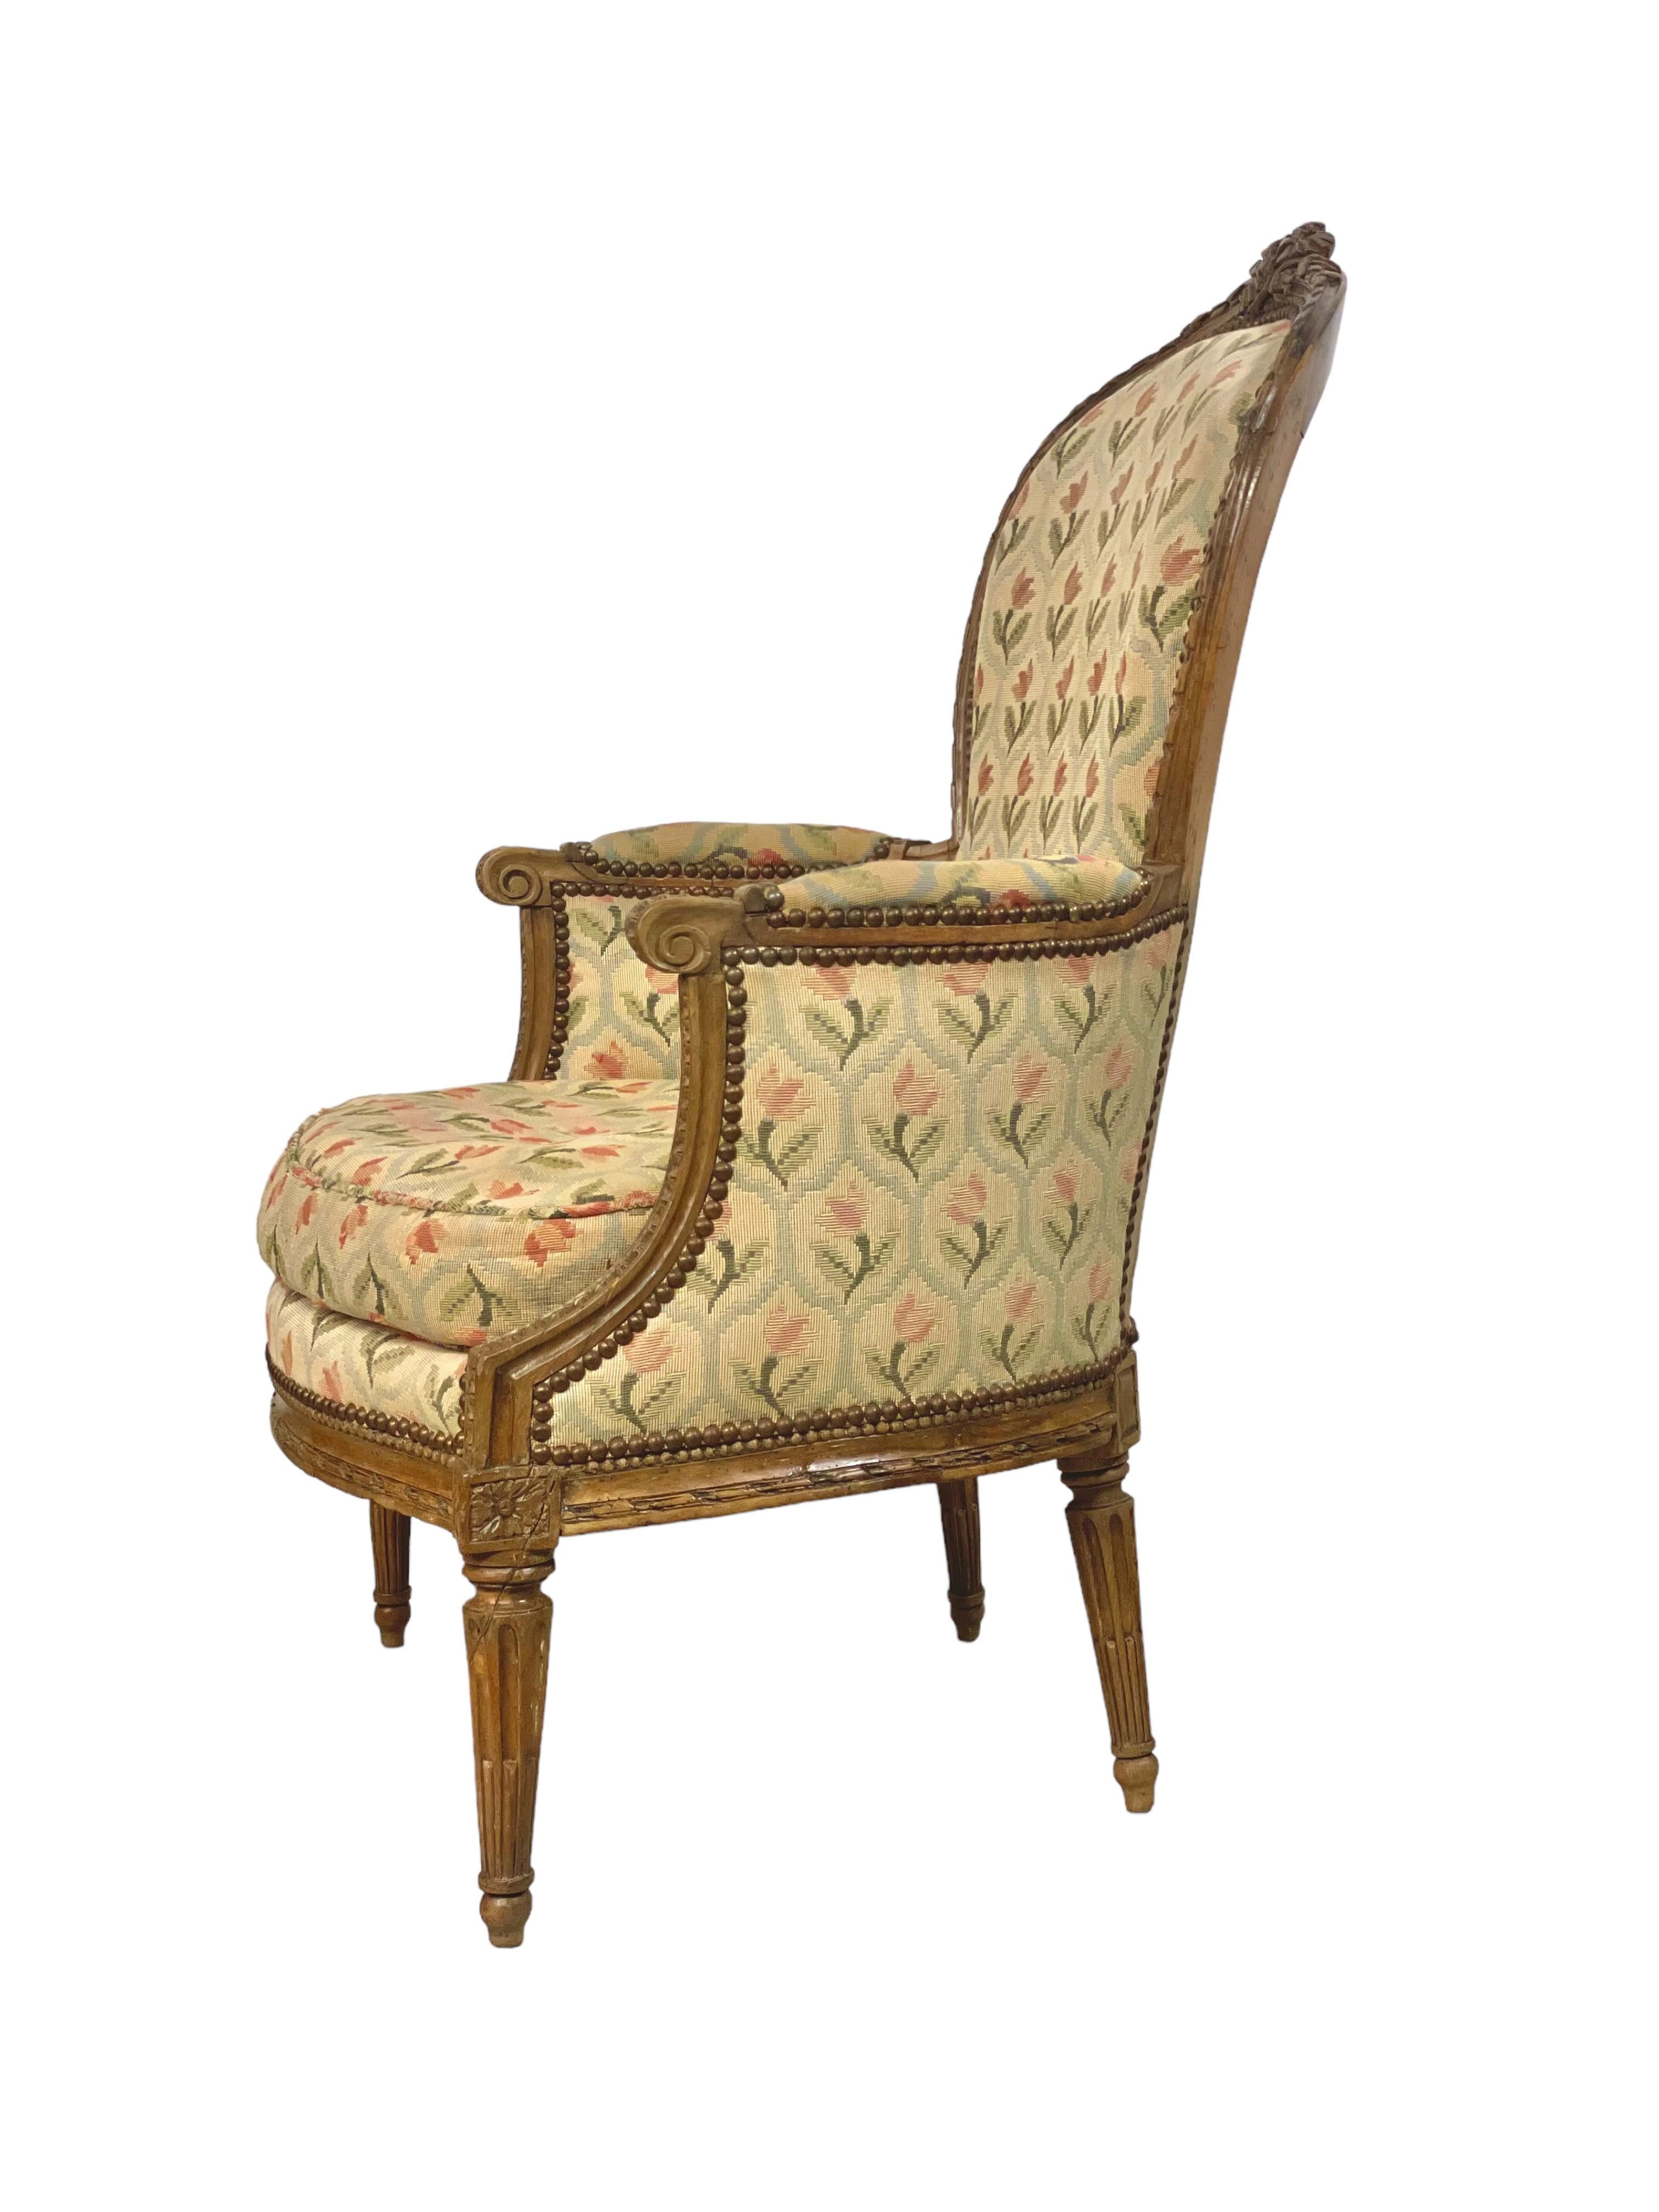 This very decorative Louis XVI Bergère armchair is beautifully crafted from oak and dates from the 18th century. Elegant and comfortable, it has been exquisitely hand-carved, with exceptional detailing throughout. The slightly curved medallion